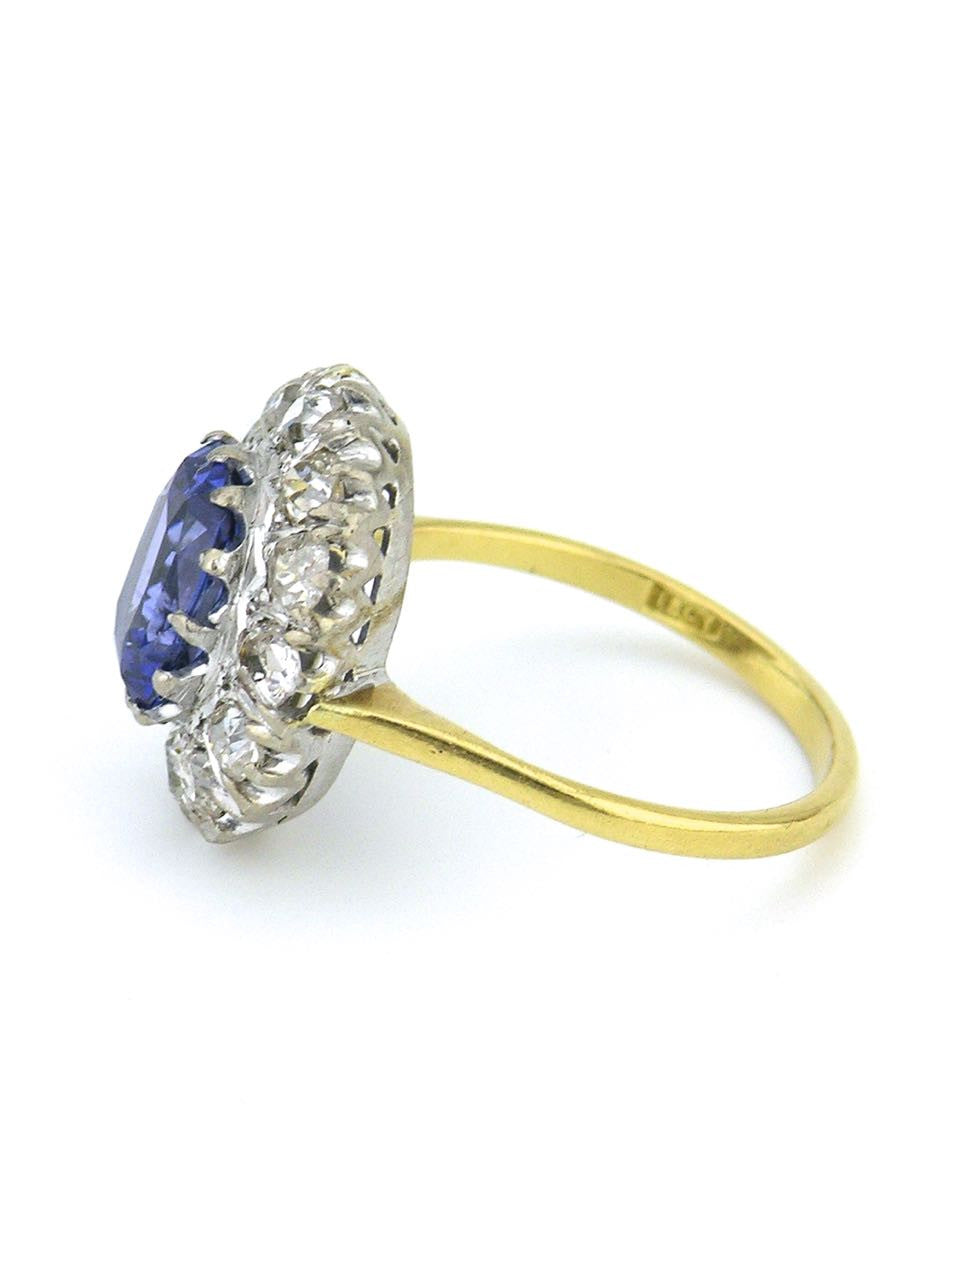 18k white and yellow gold diamond and sapphire ring